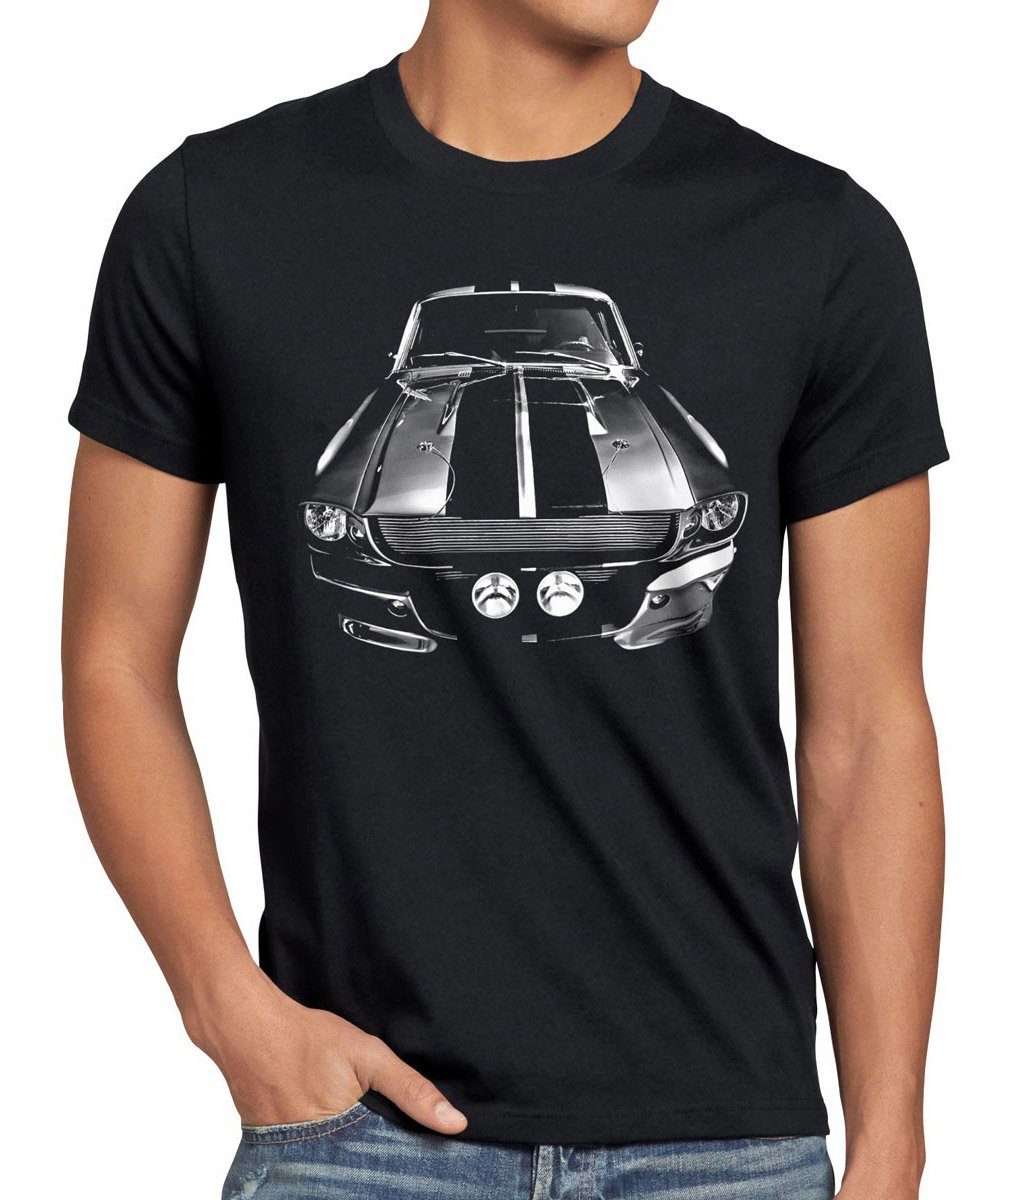 eleanor Mustang rock style3 muscle car pony usa Herren shelby ford Print-Shirt v8 T-Shirt gt500 us